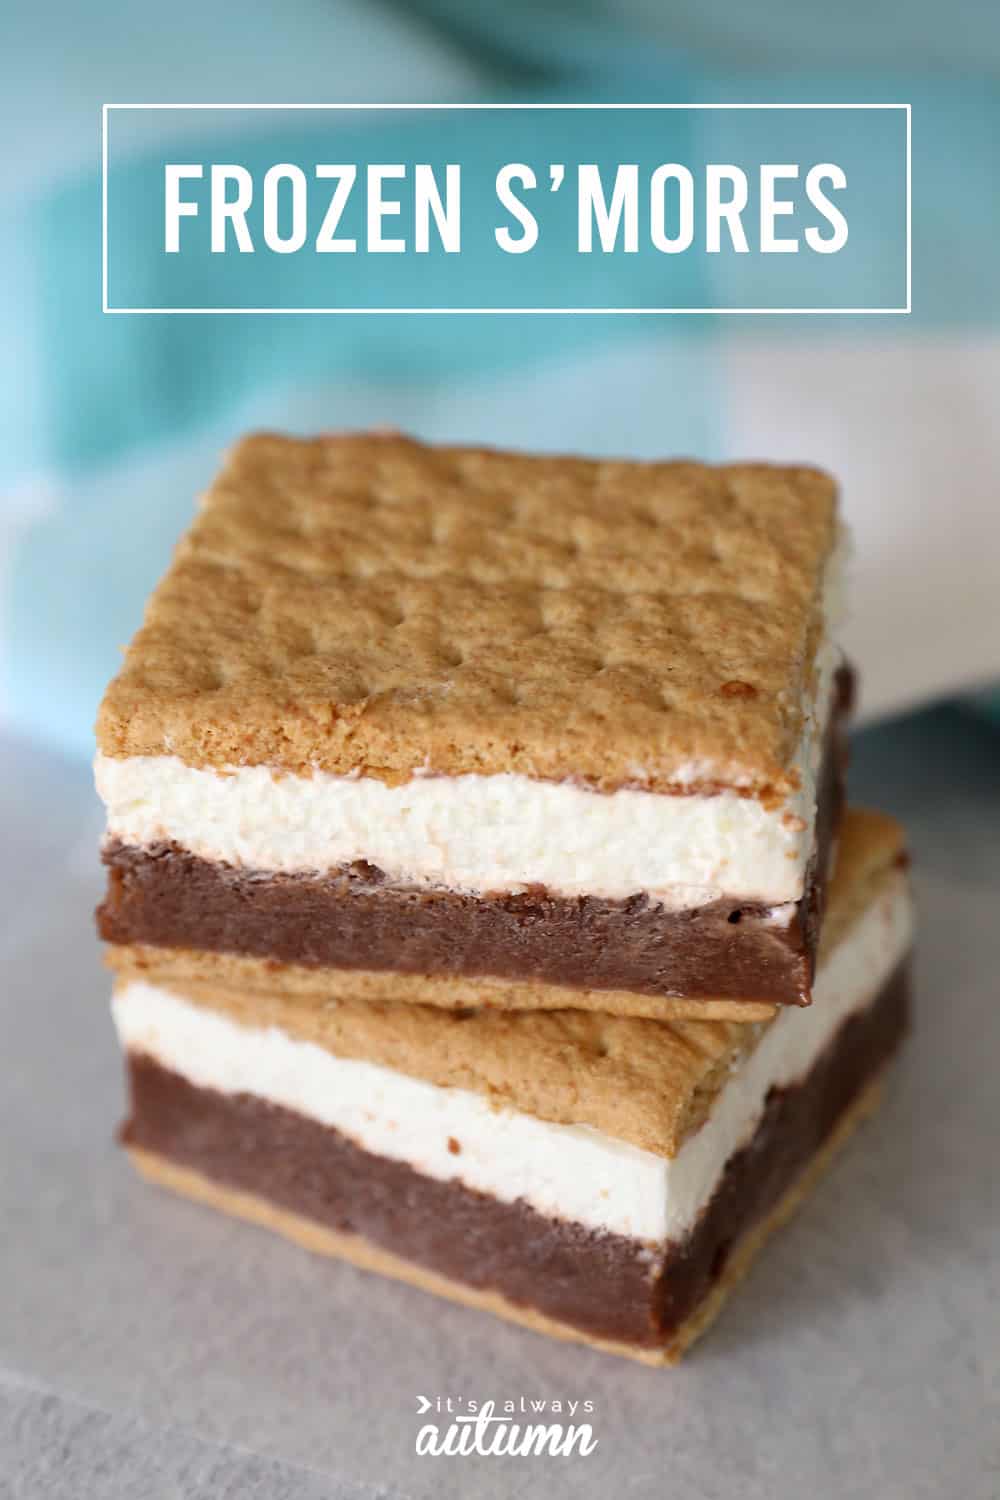 Frozen S'mores Pudding, cream, graham crackers - Friday Finds Roundup Post | July 10, 2020